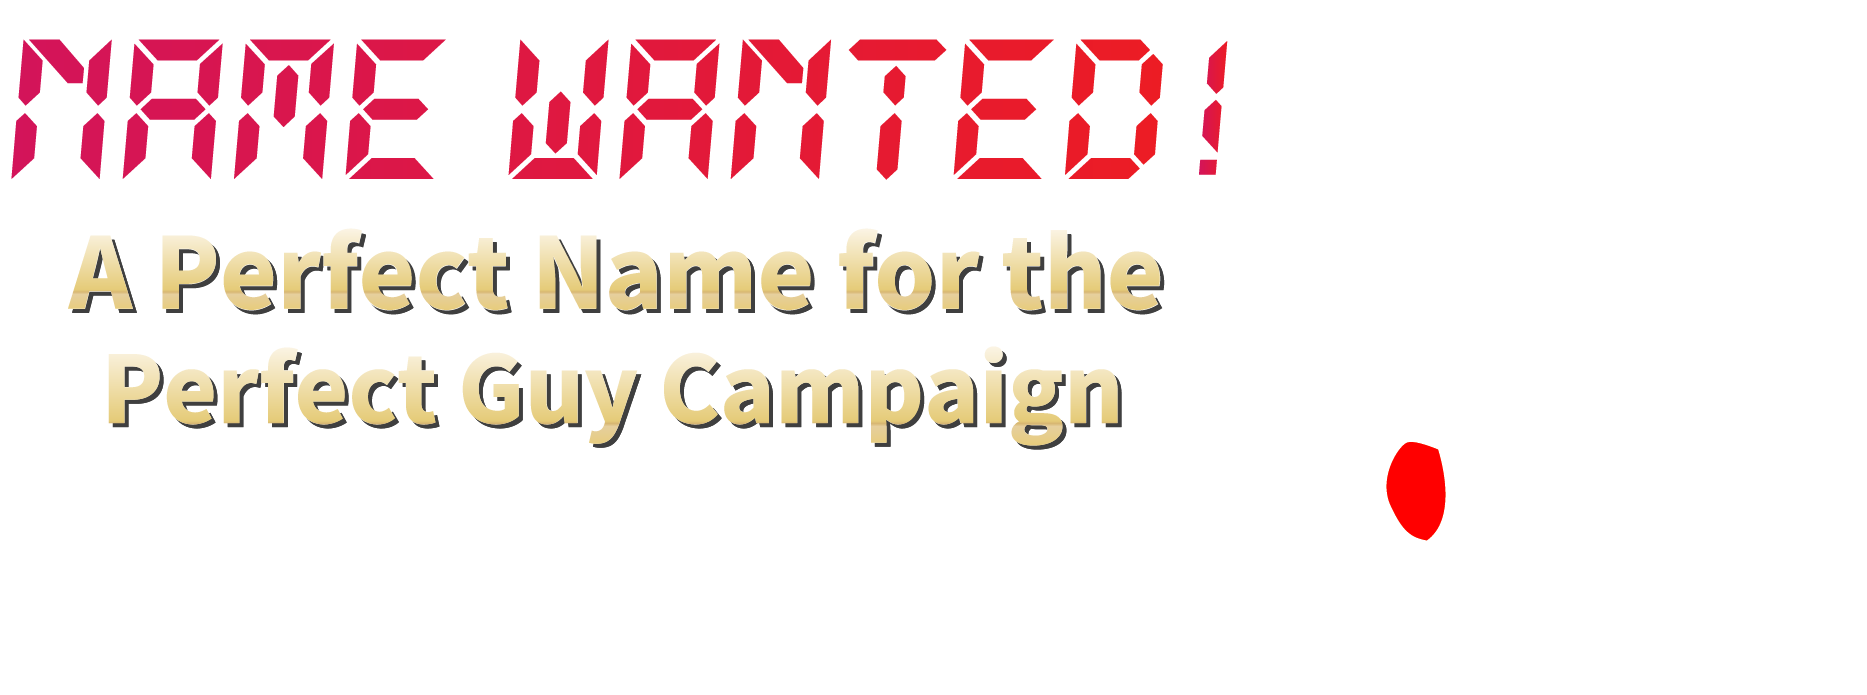 Announcing:Winner of Mascot Naming Competition!